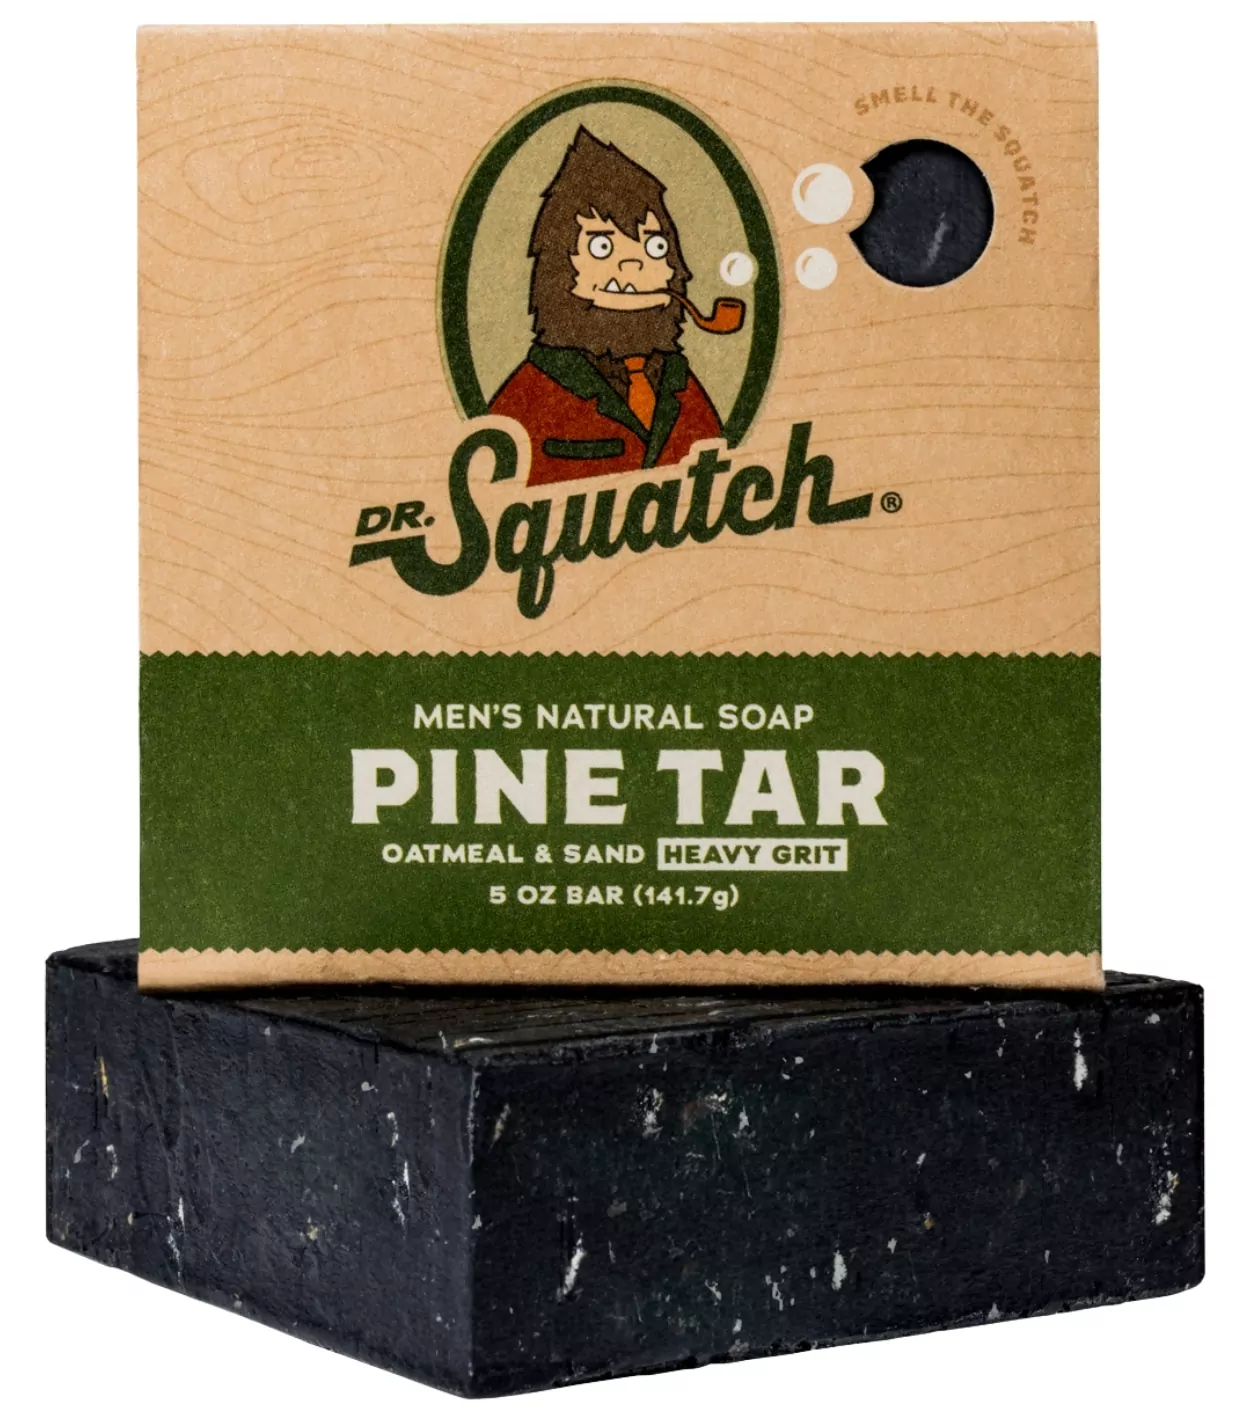 Bay Rum and Pine Tar honest review : r/DrSquatch